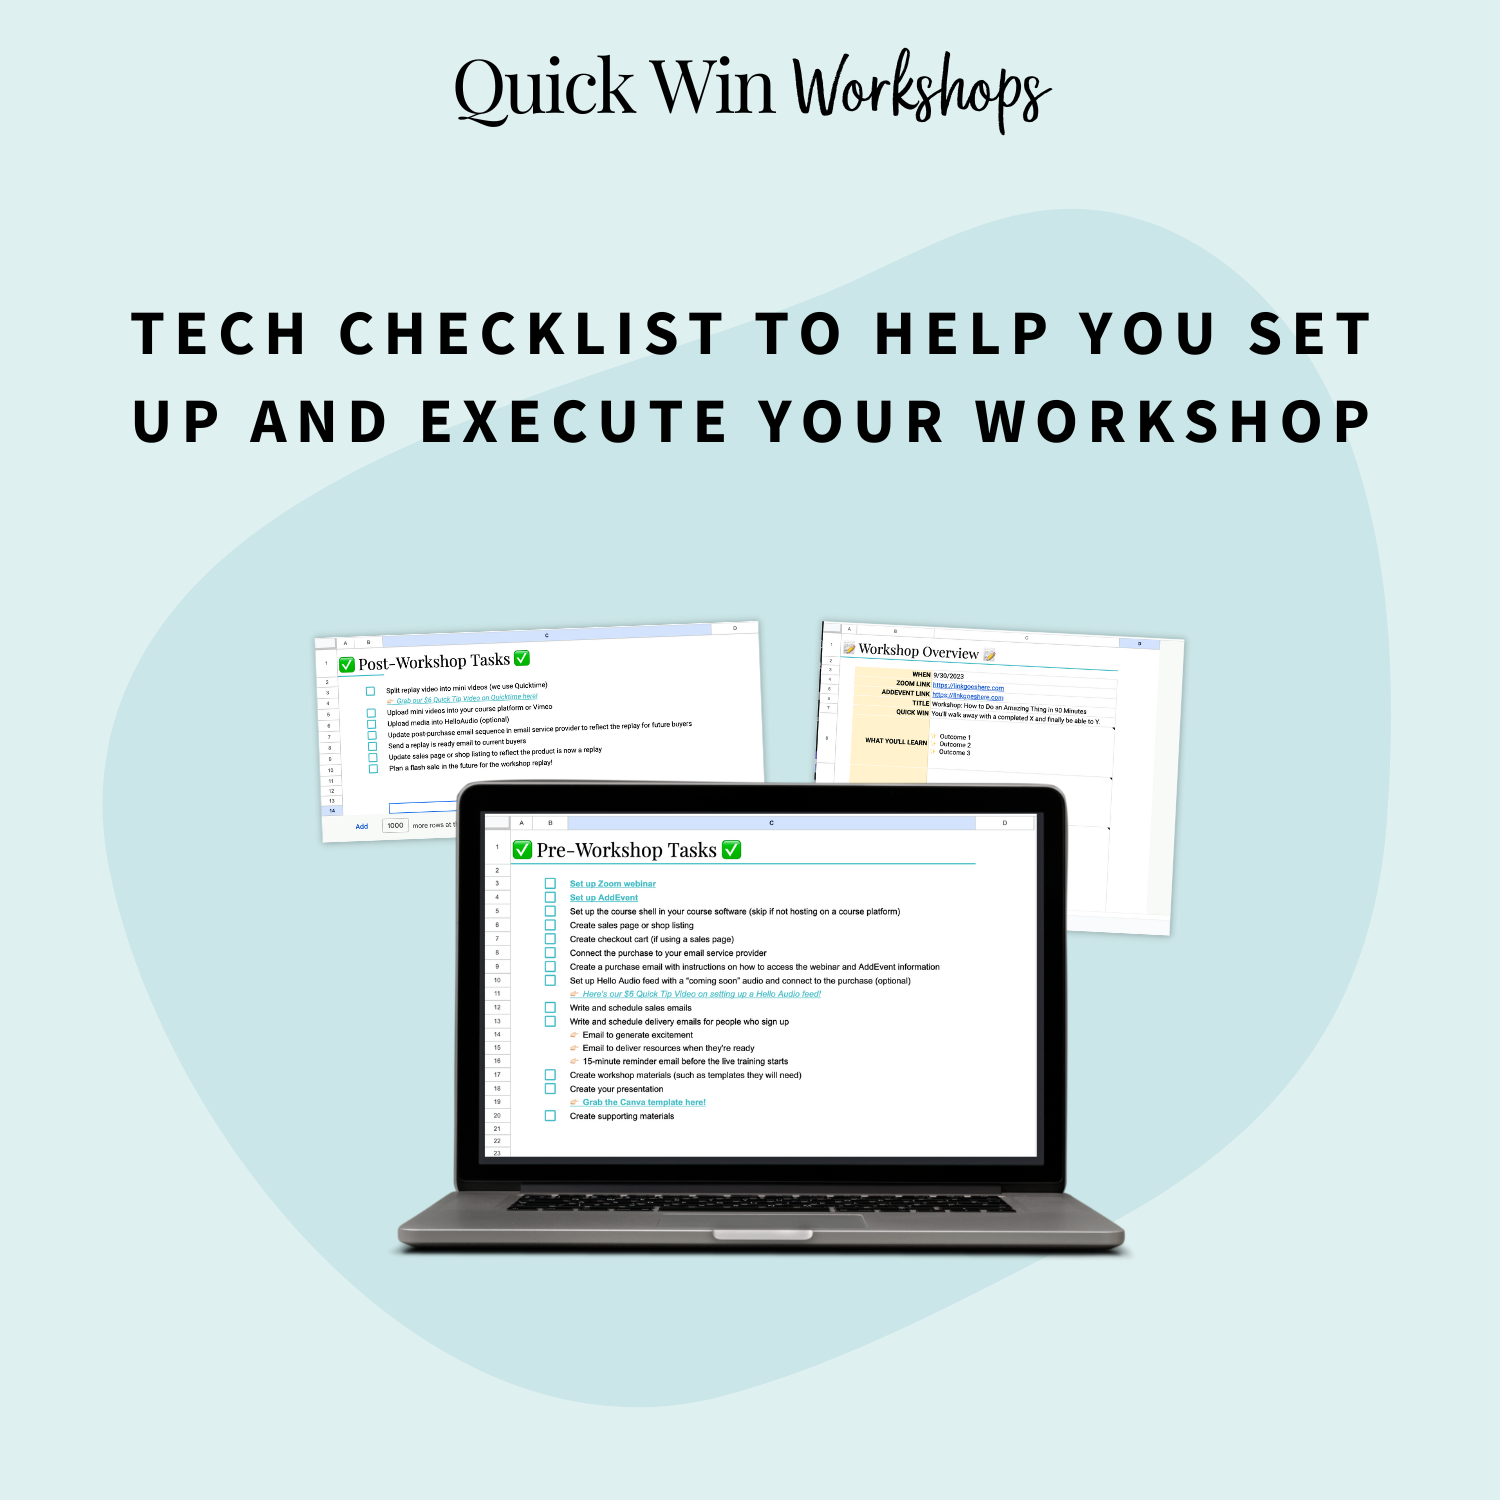 Quick Win Workshop: How to Run Quick Win Workshops that Boost Your Bottom Line